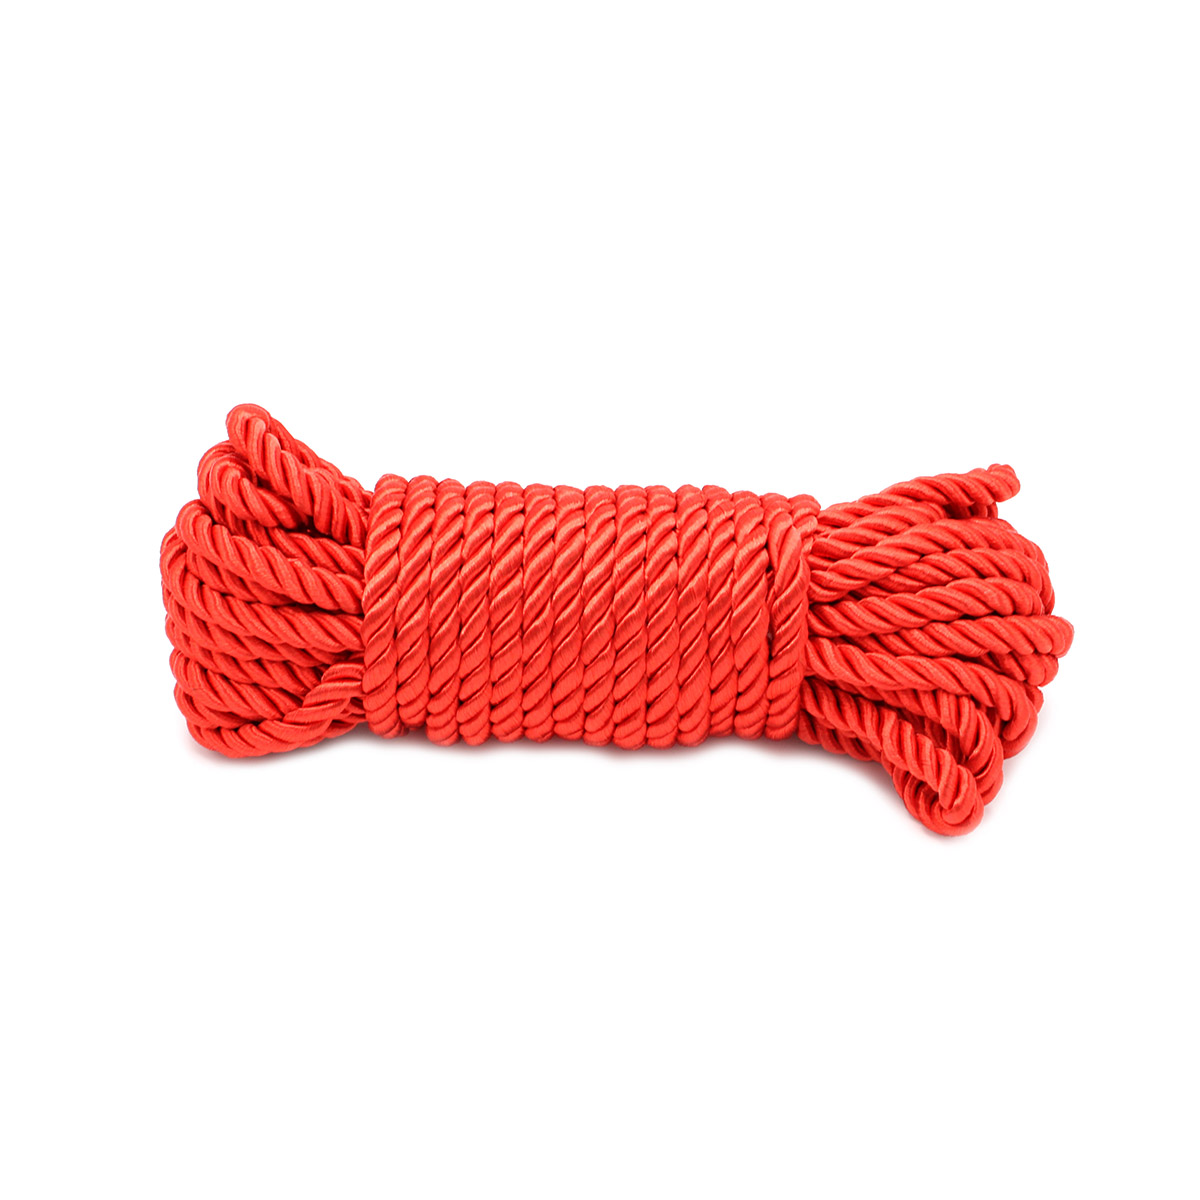 Deluxe-Bondage-Rope-10-M-Red-111-SM433-RED-1